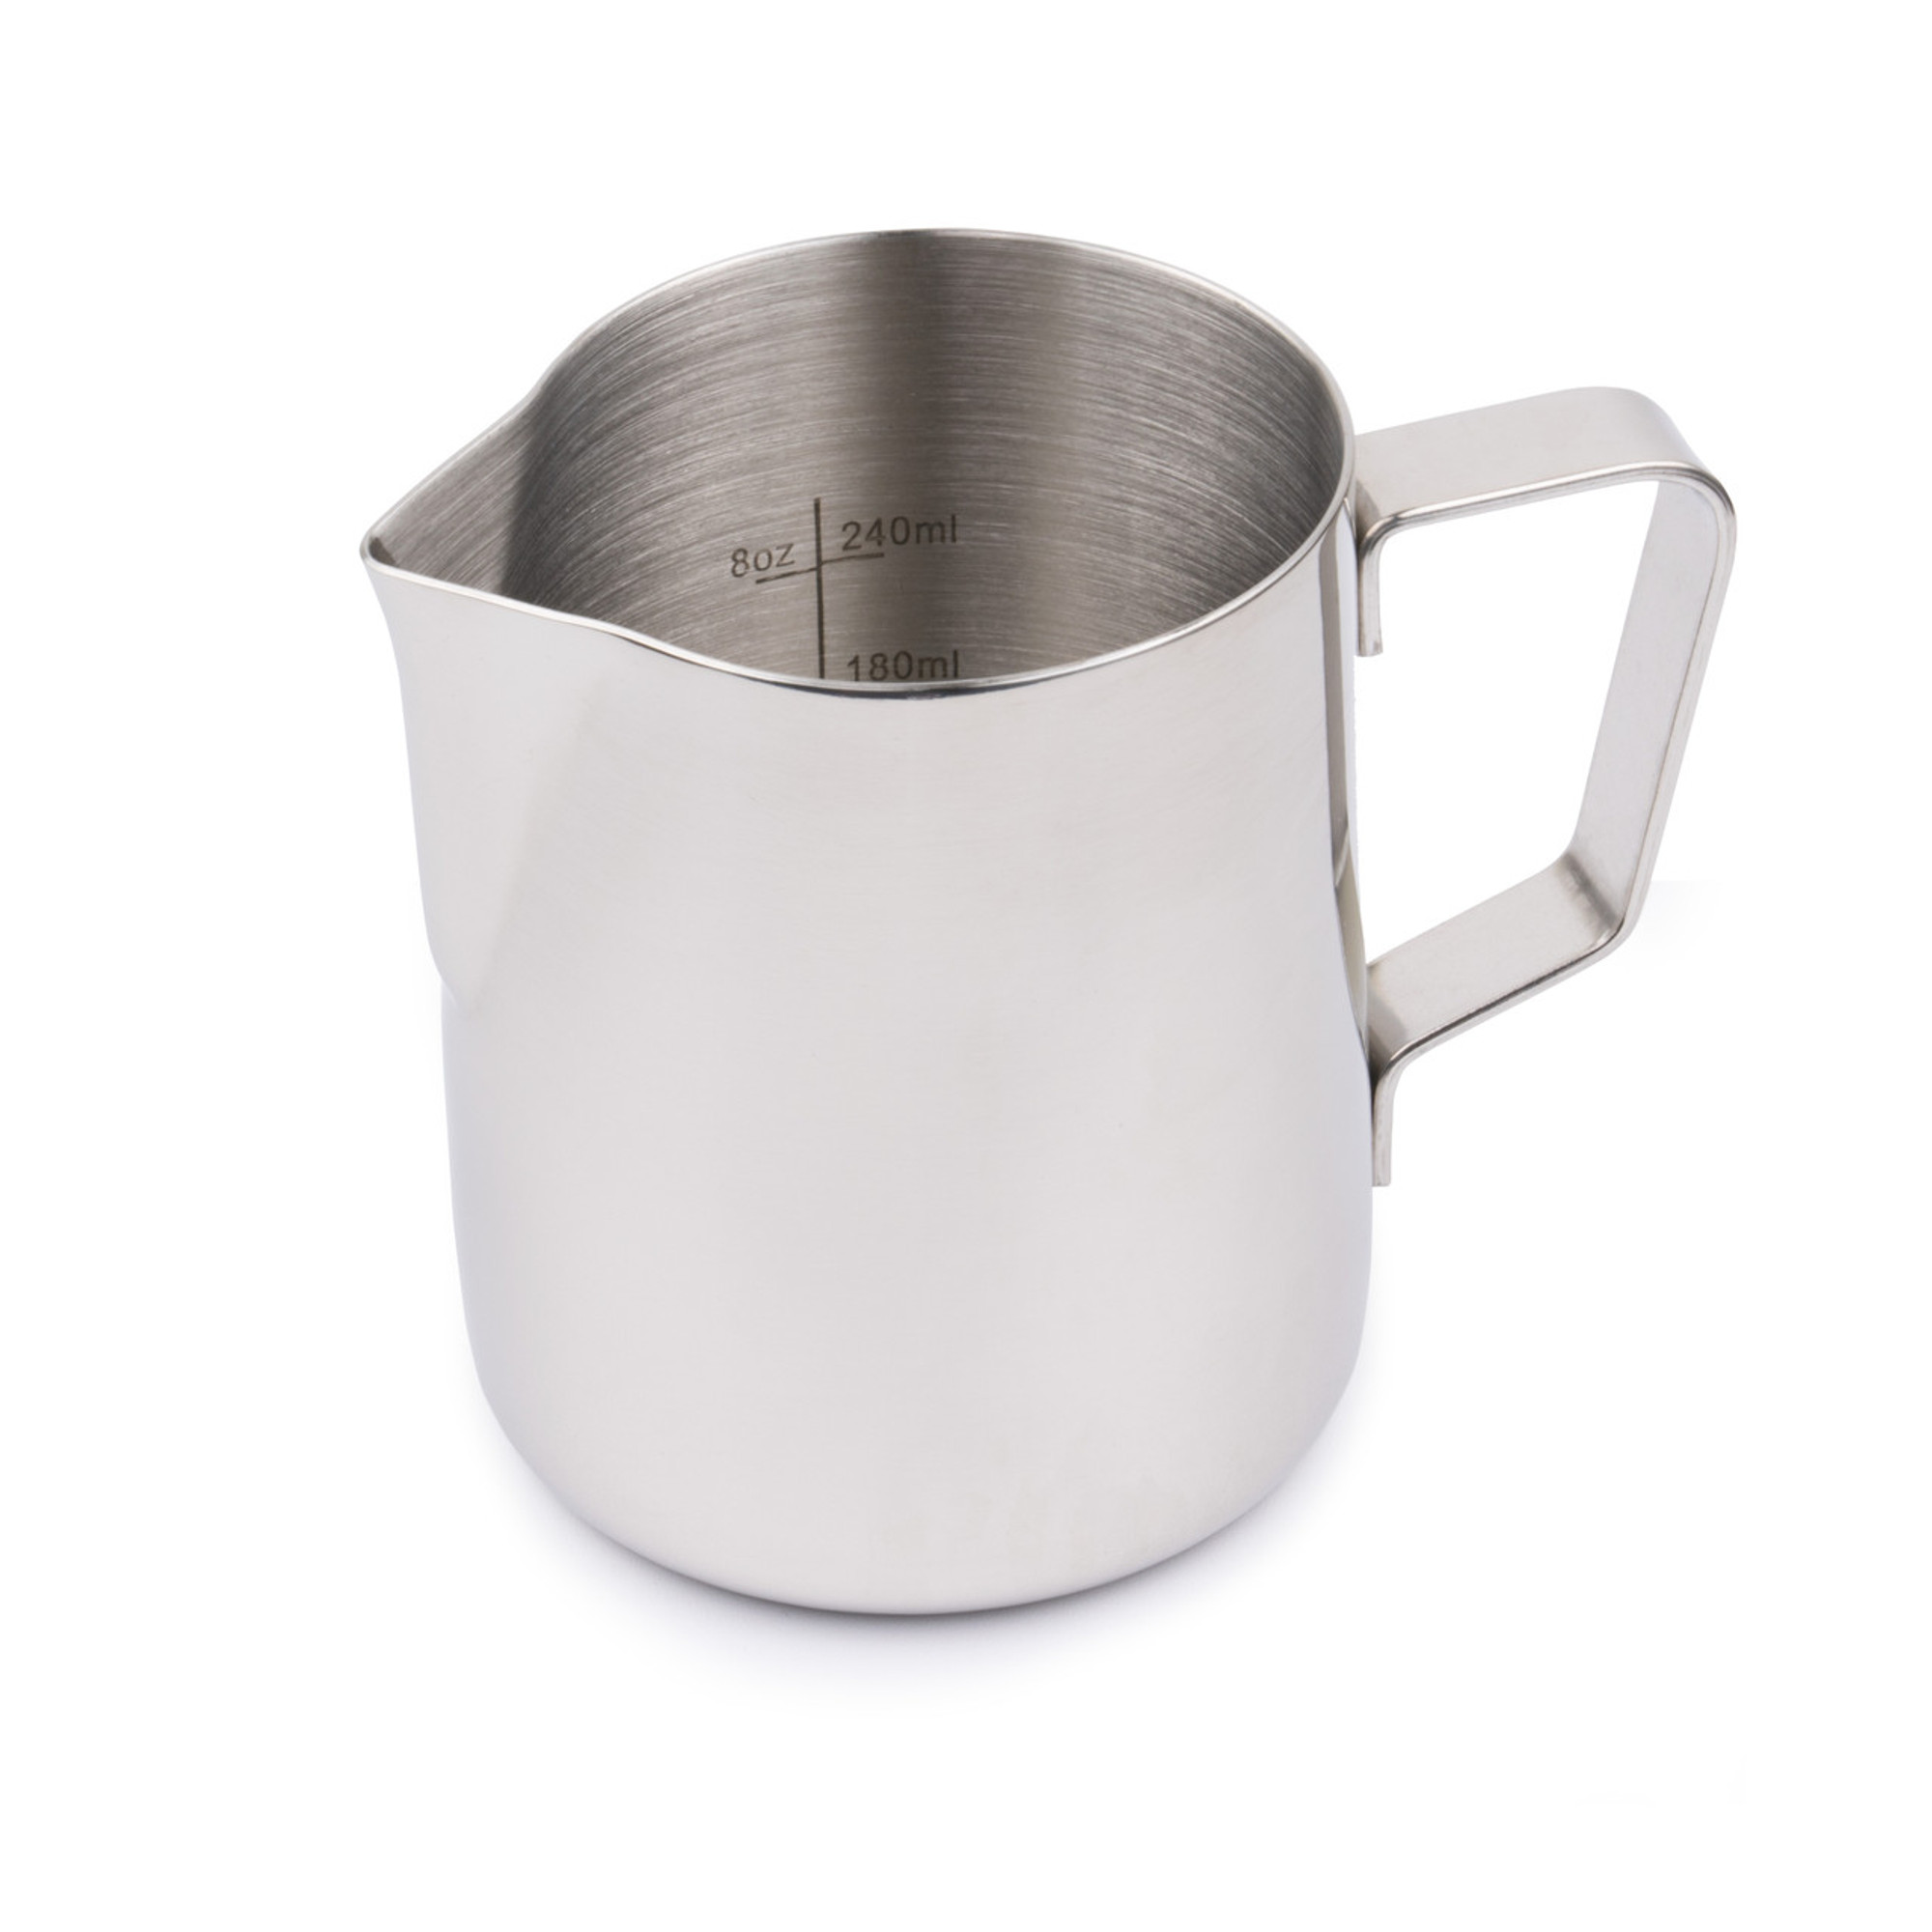 Revolution Stainless Steel Steaming Pitcher - 12 oz